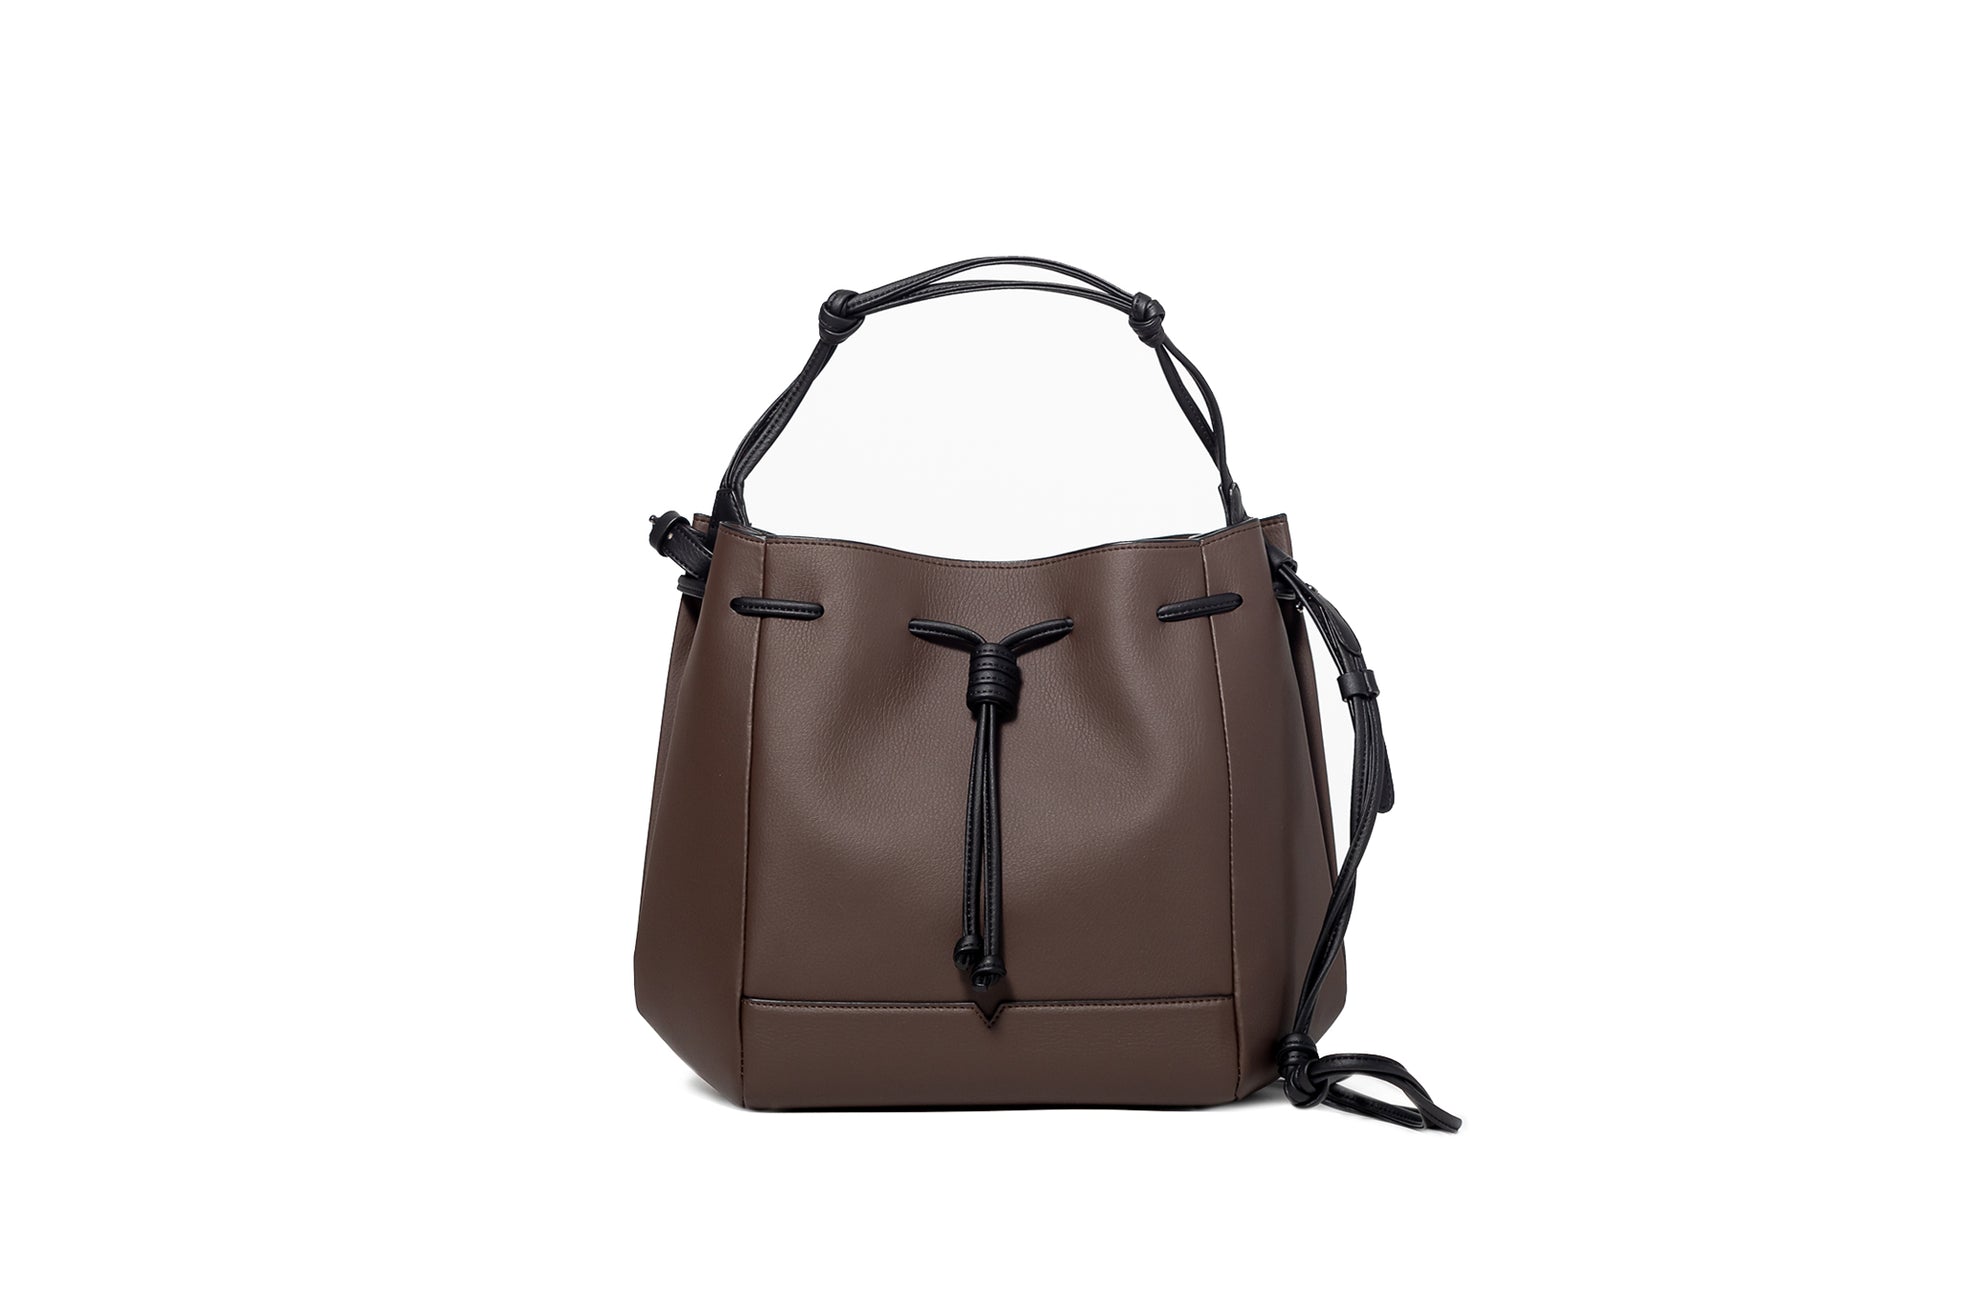 The Bucket Crossbody in Technik-Leather in Taupe & Black  image 1